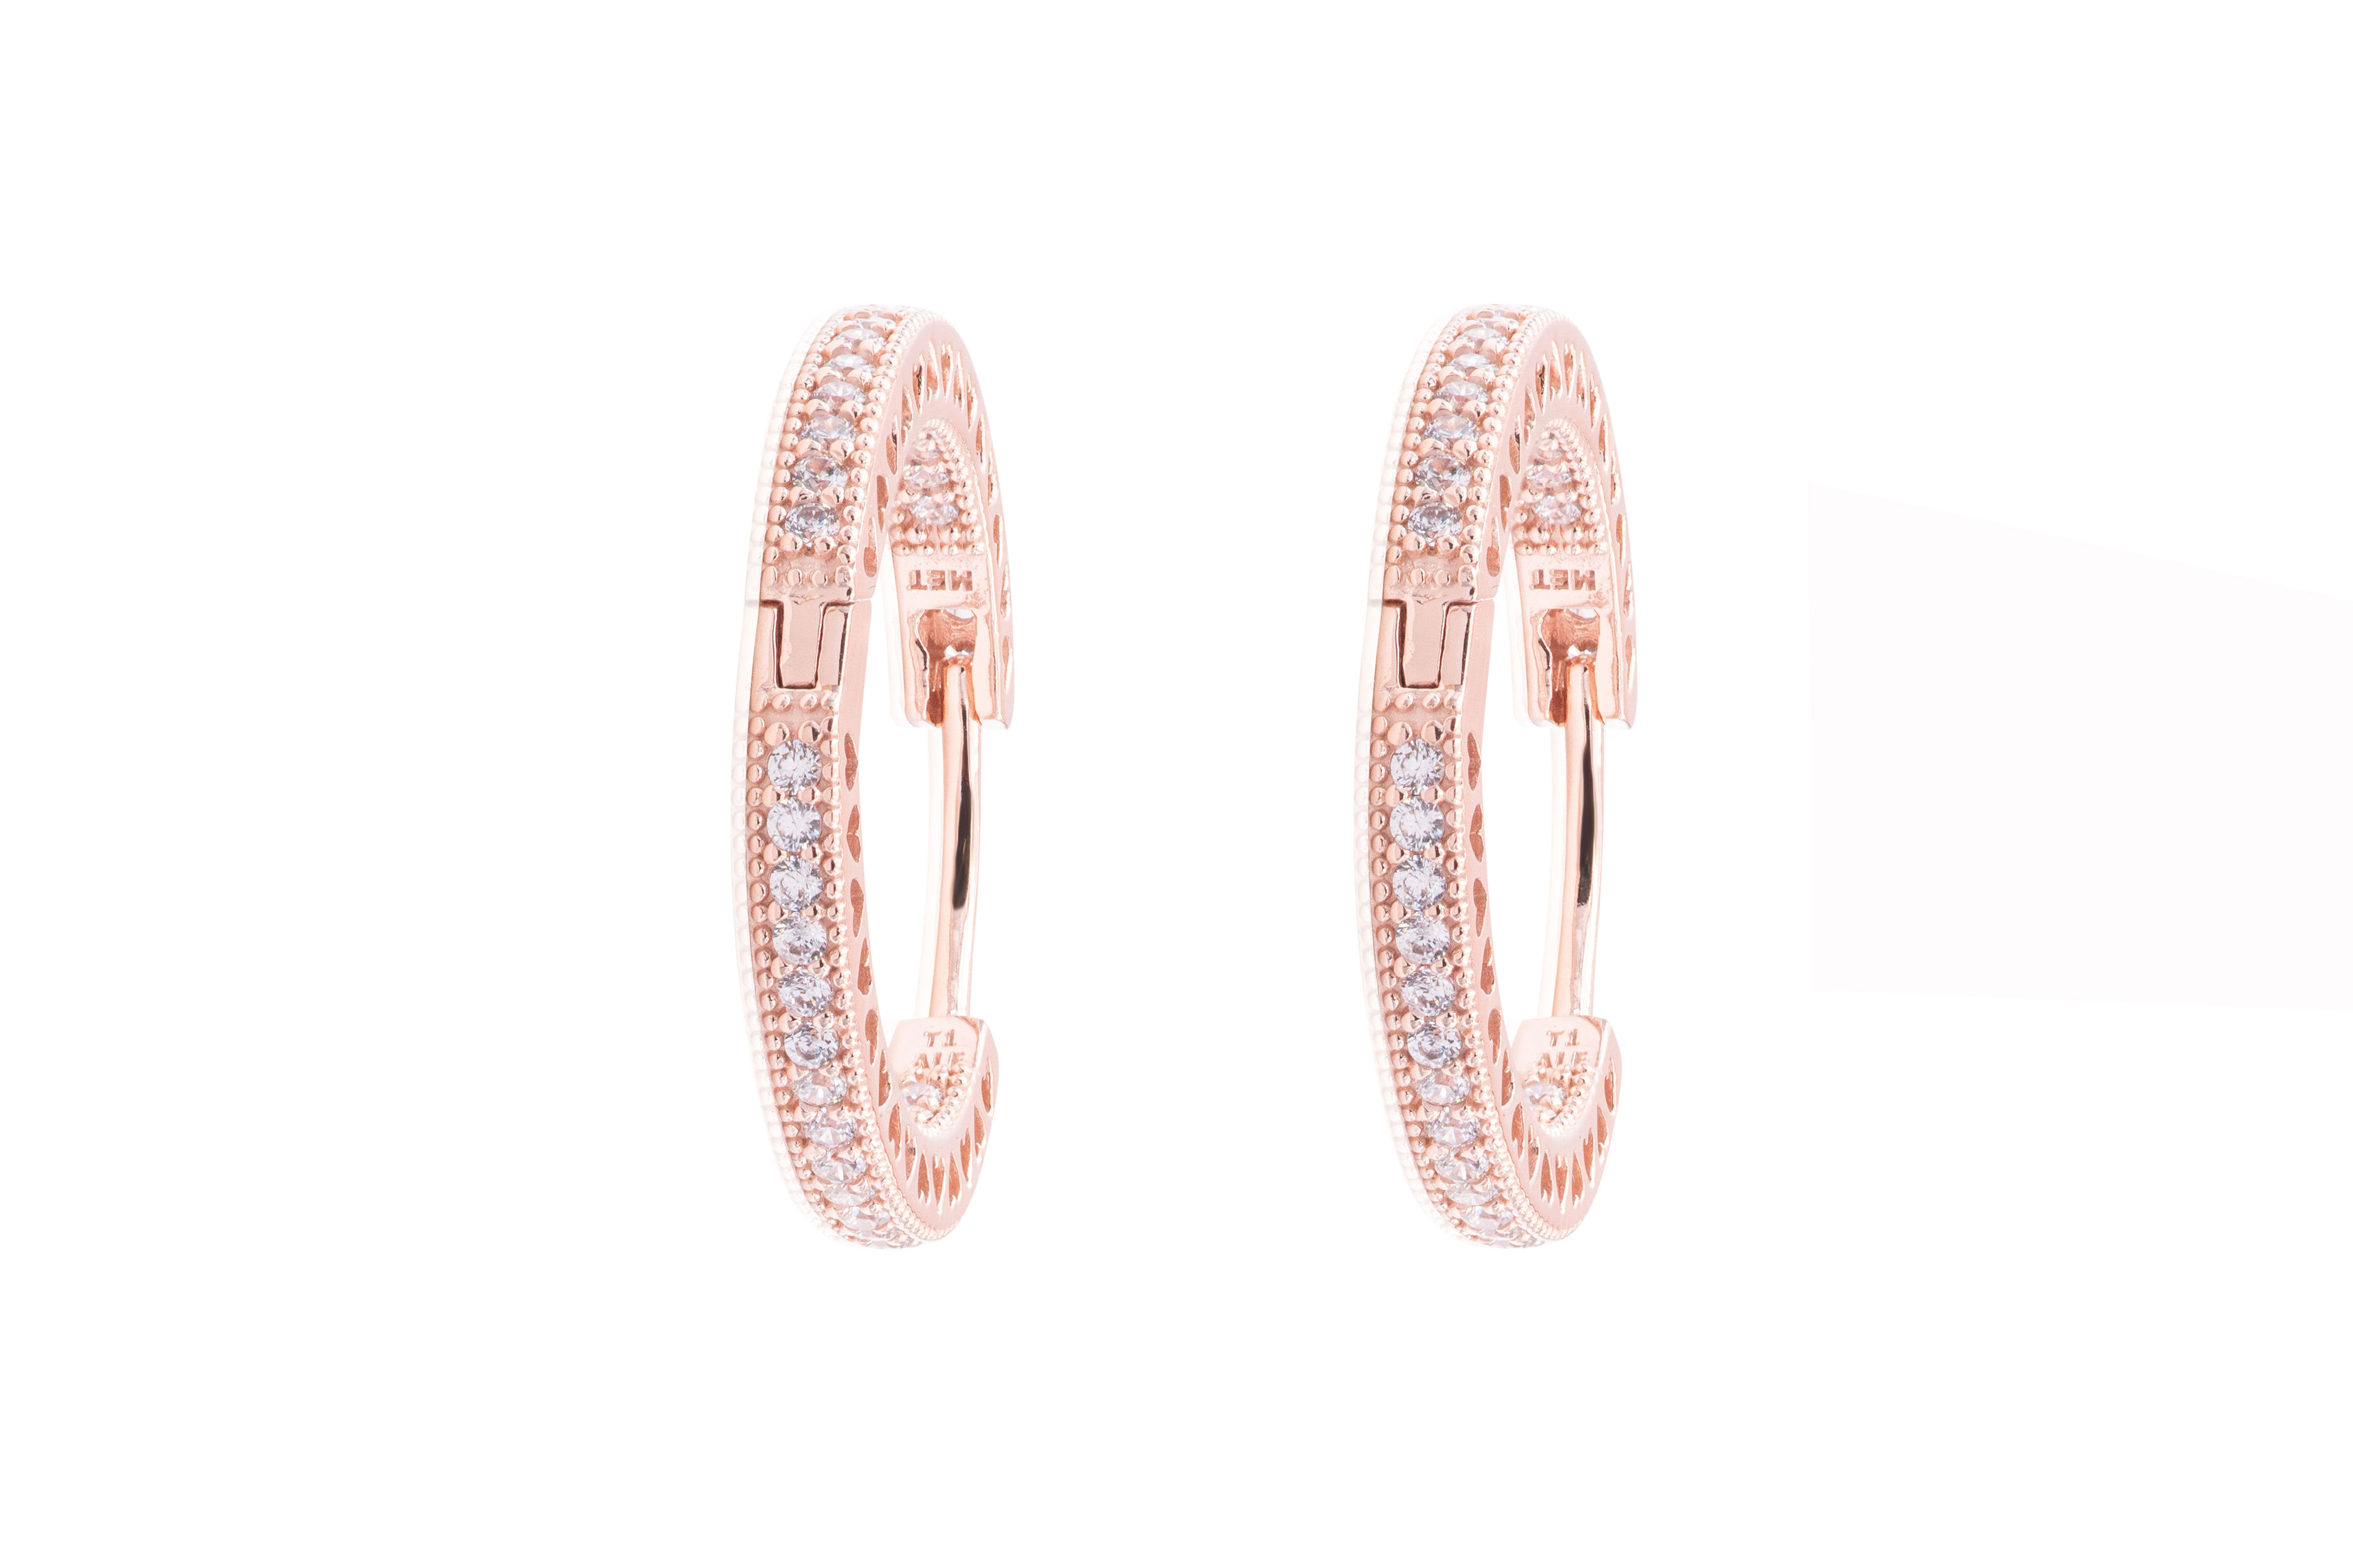 Pandora Hoop Earrings In Pandora Rose With Clear Cubic Zirconia And Cut-out Heart Details